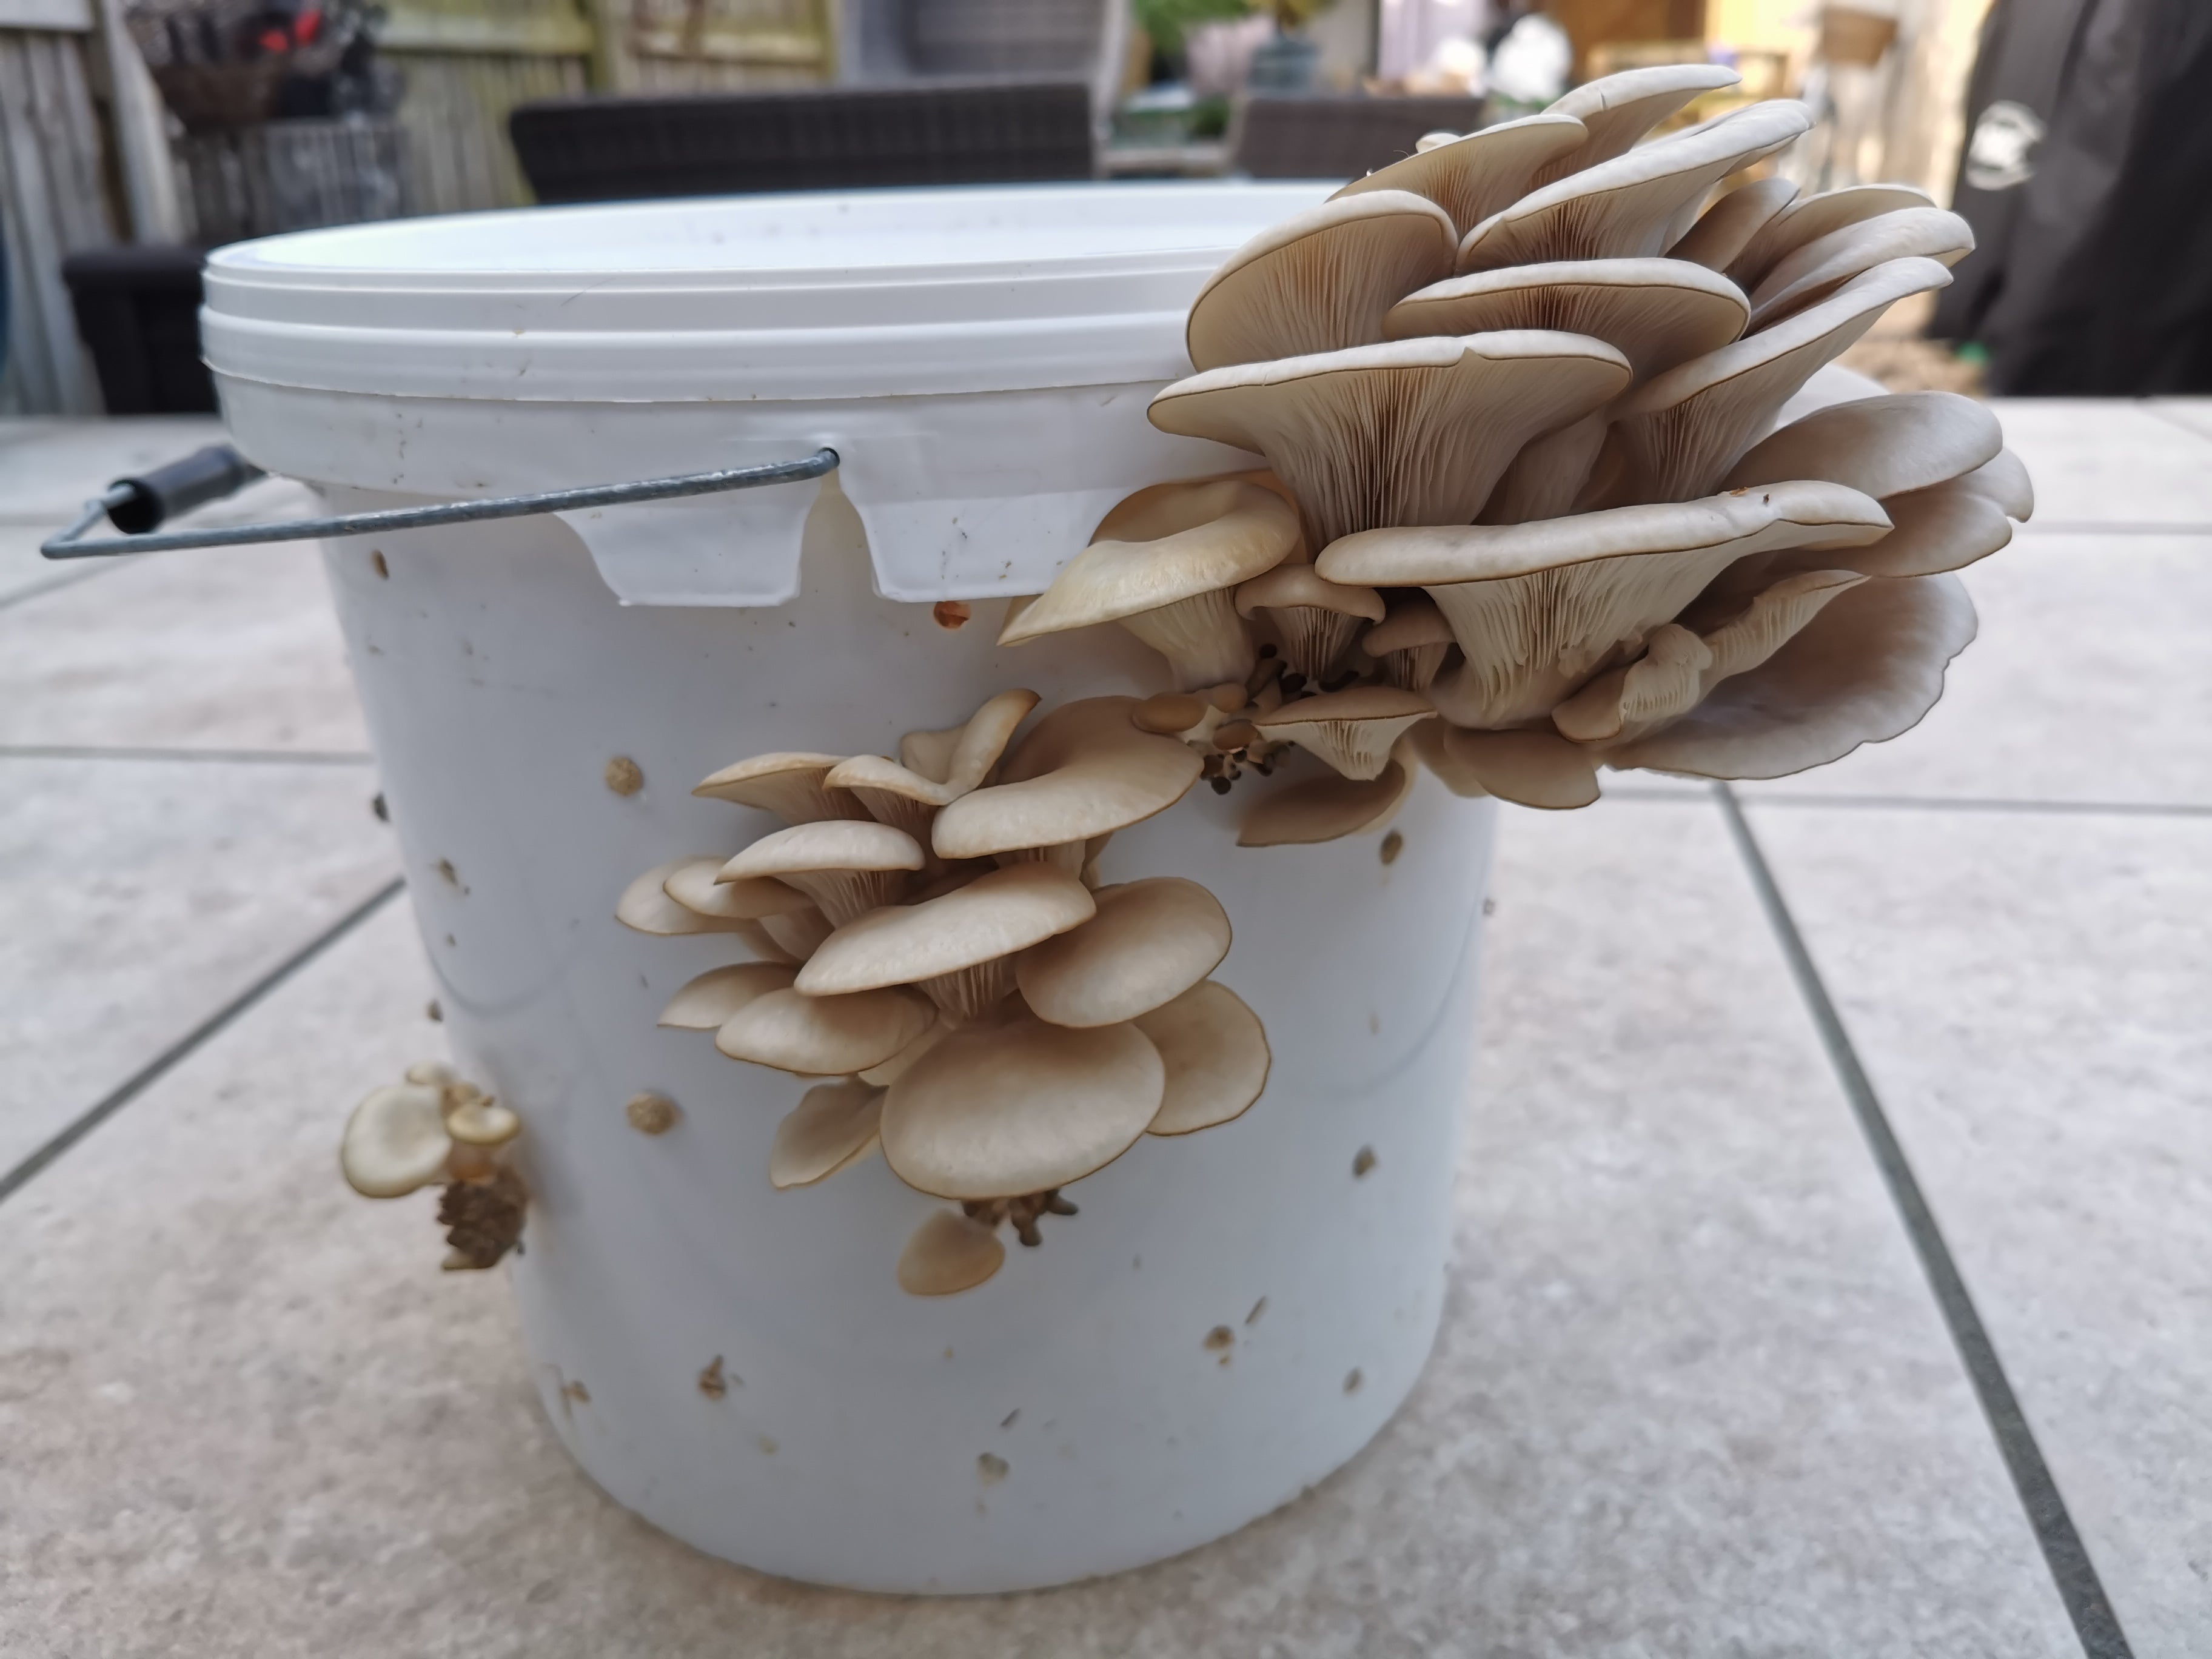 Straw Mushroom for Babies - When Can Babies Eat Straw Mushrooms